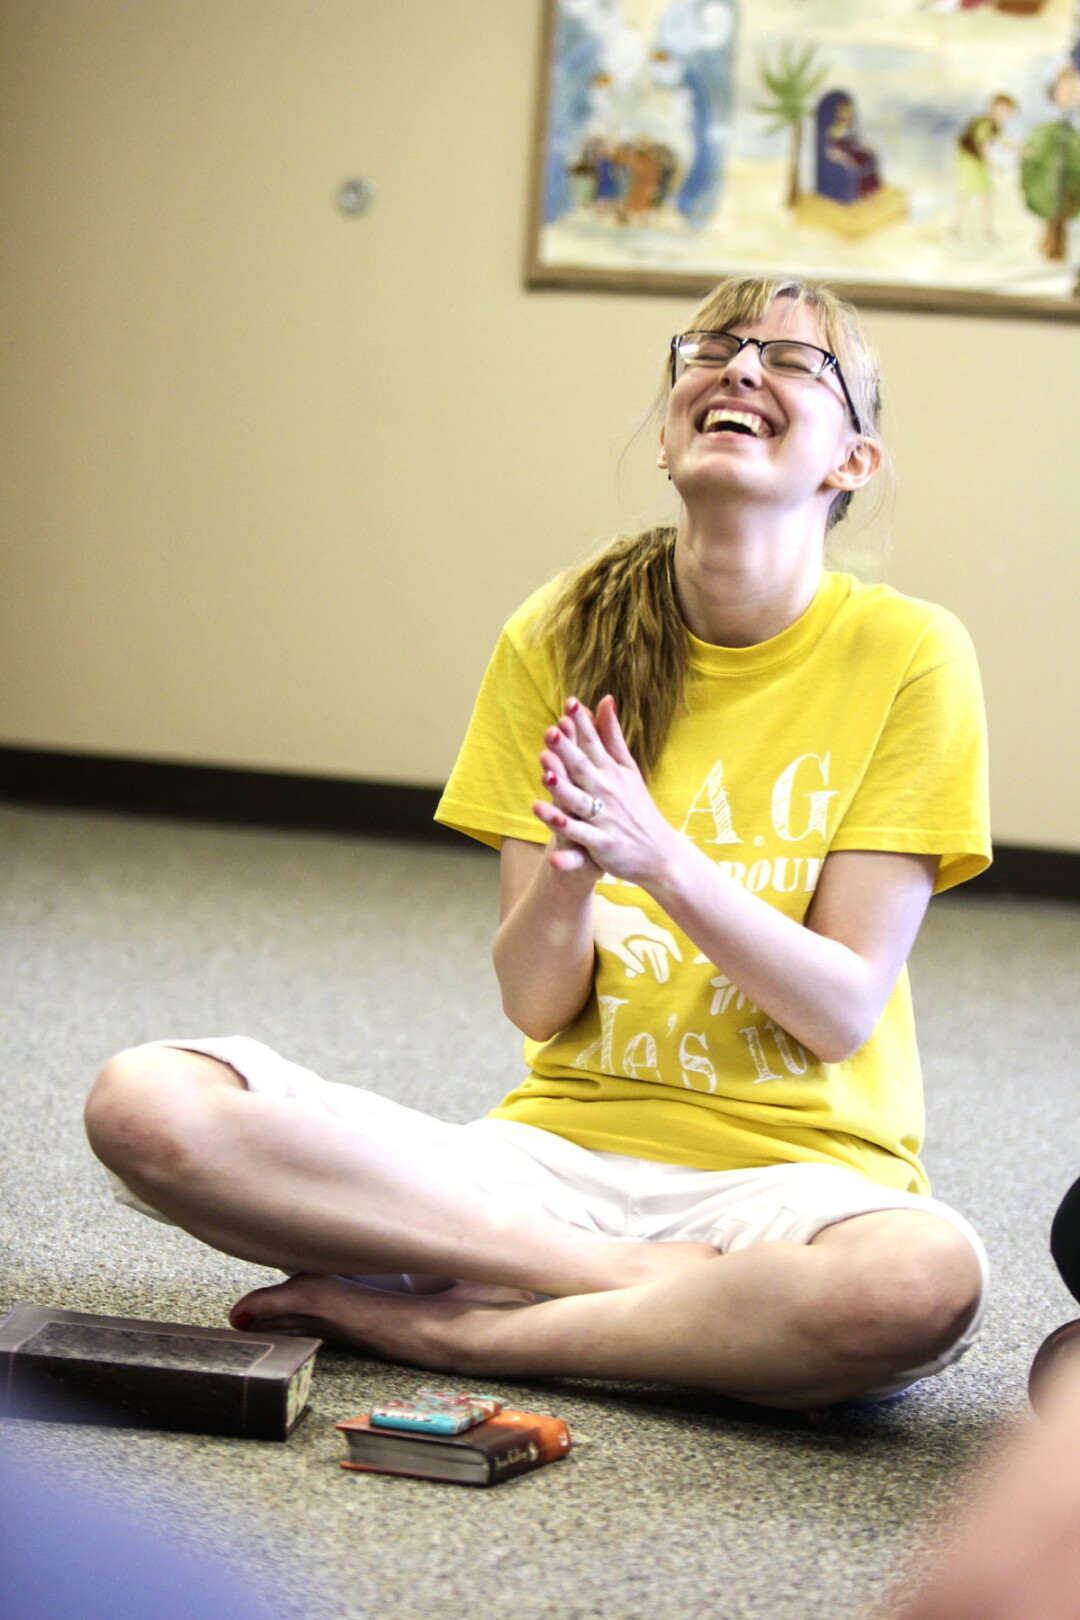 ACTING UP. Alynzia Fenske (above) is the self-described “organizer <br>and head dreamer” for TAG Skit Group (shown in rehearsal at <br>Peace Church in Eau Claire), a Christian teen theater troupe now <br>producing its first full-length play.